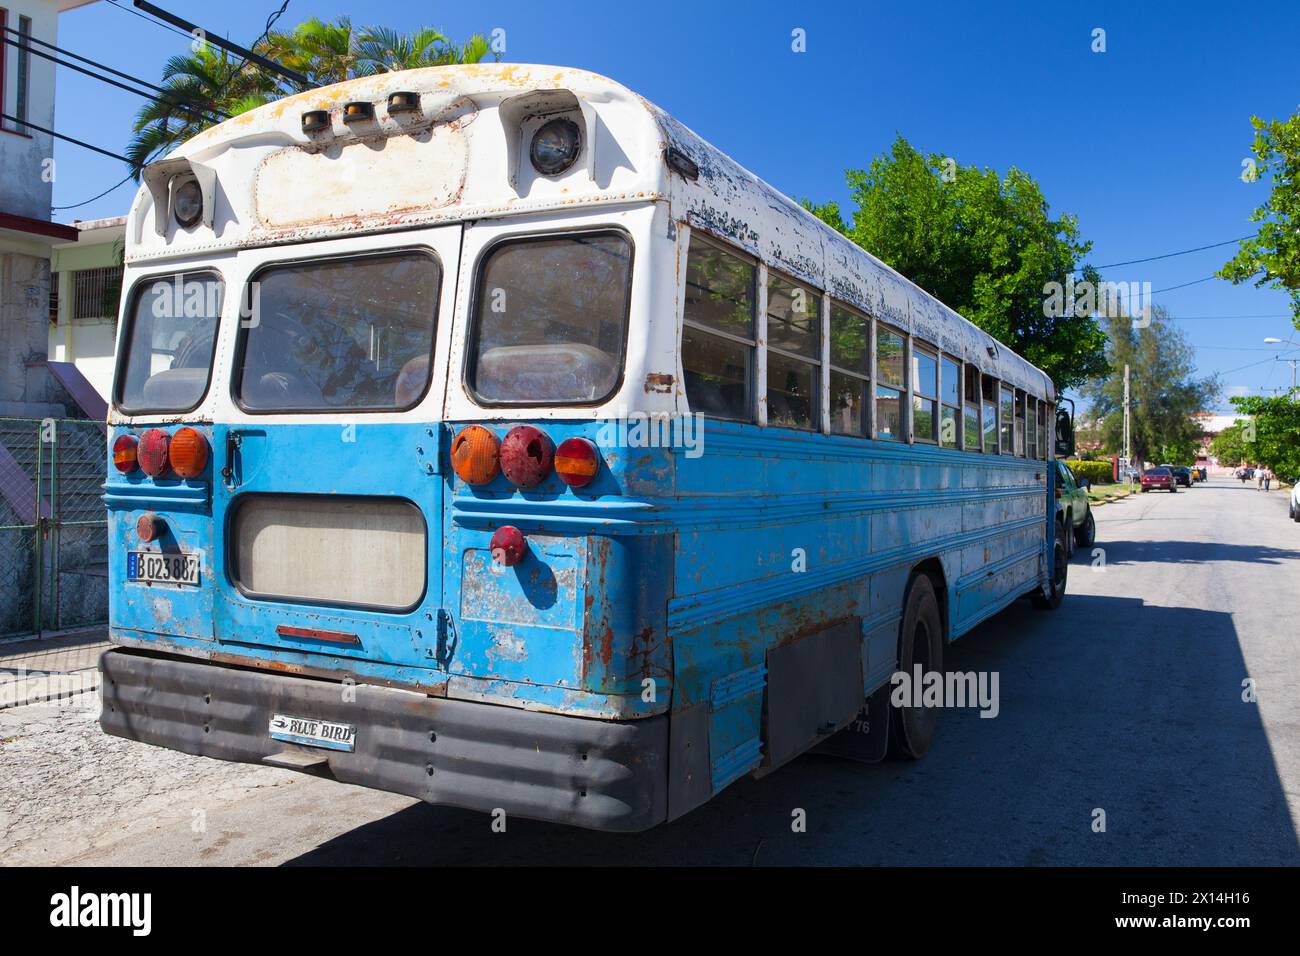 Havana, Cuba - January 2,2017: Typical old school bus parked in front of old building on the Havana street. Stock Photo